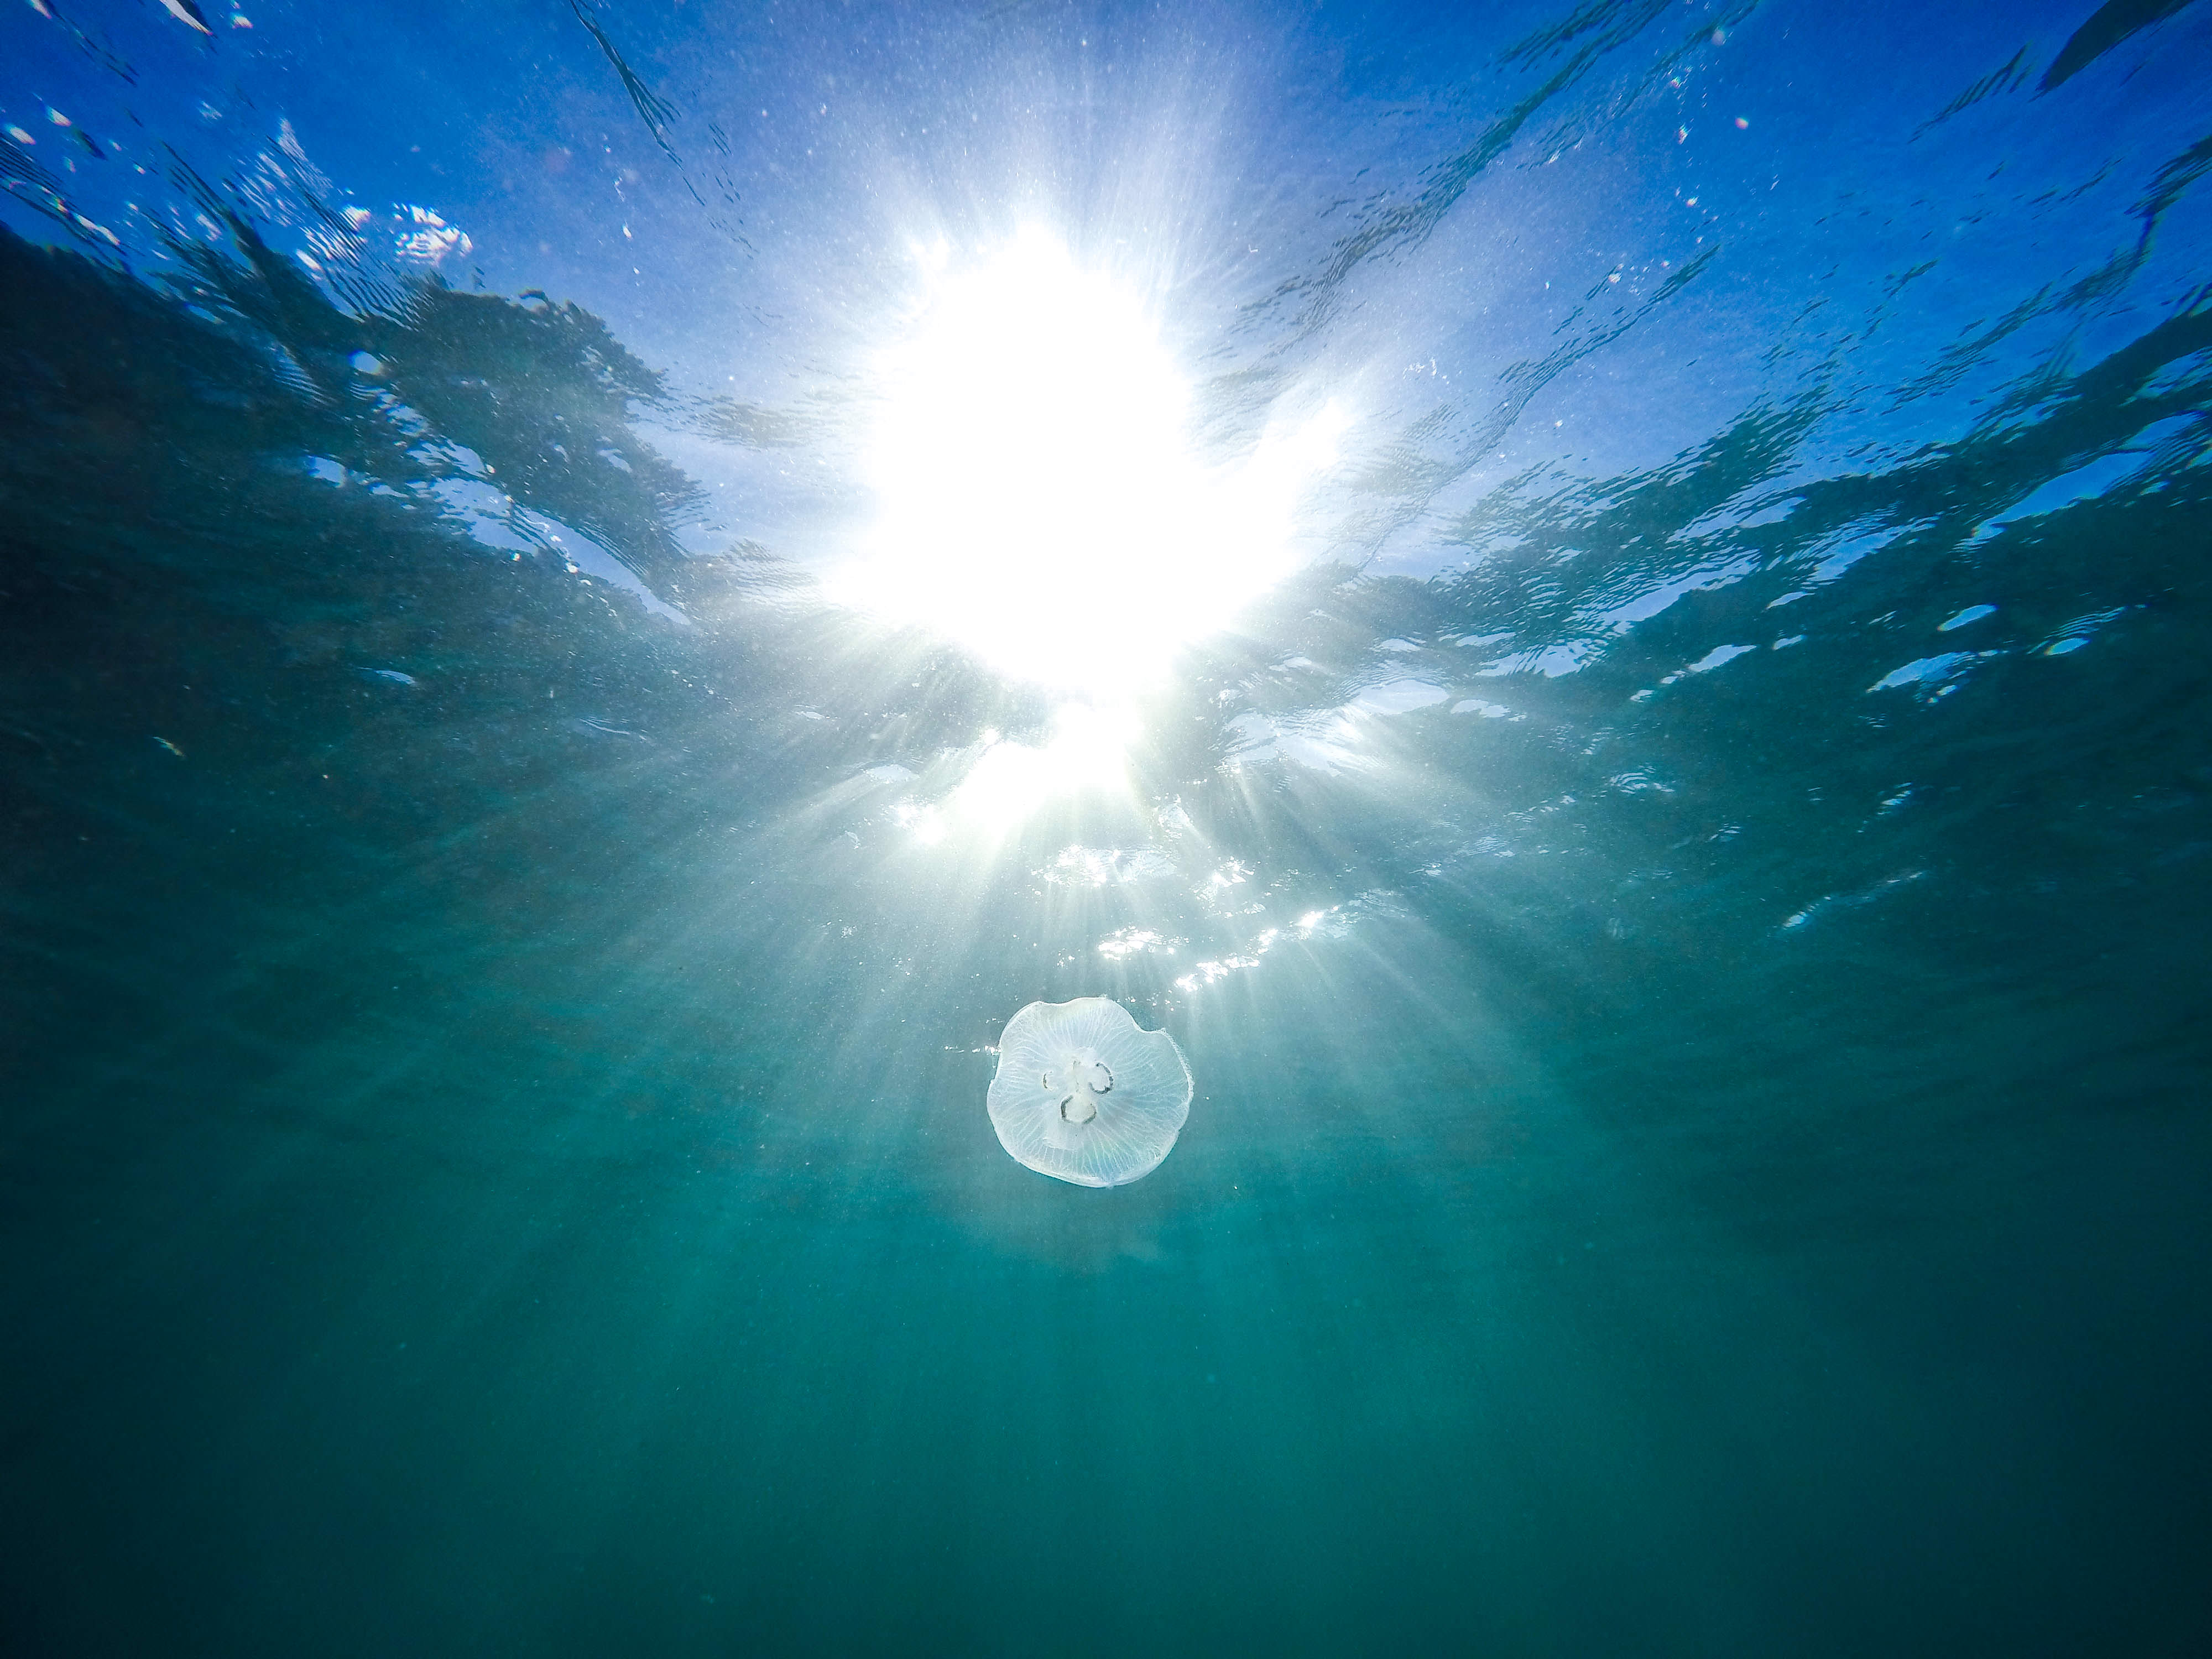 Fish swimming amidst rays of sunlight in the photic zone